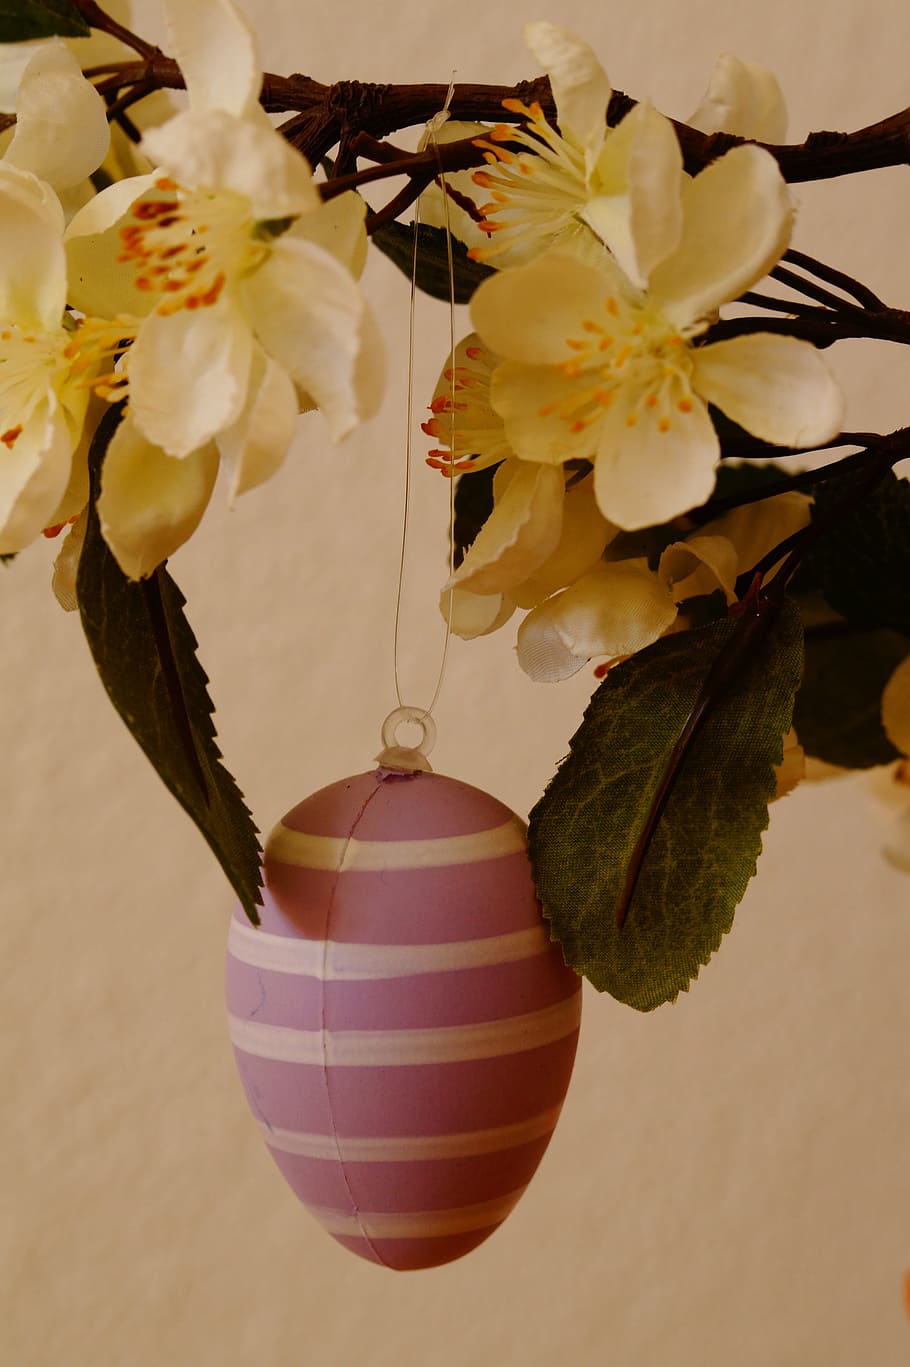 Easter, Greeting, Bouquet, Egg, easter greeting, easter bouquet, easter egg, happy easter, customs, painted egg